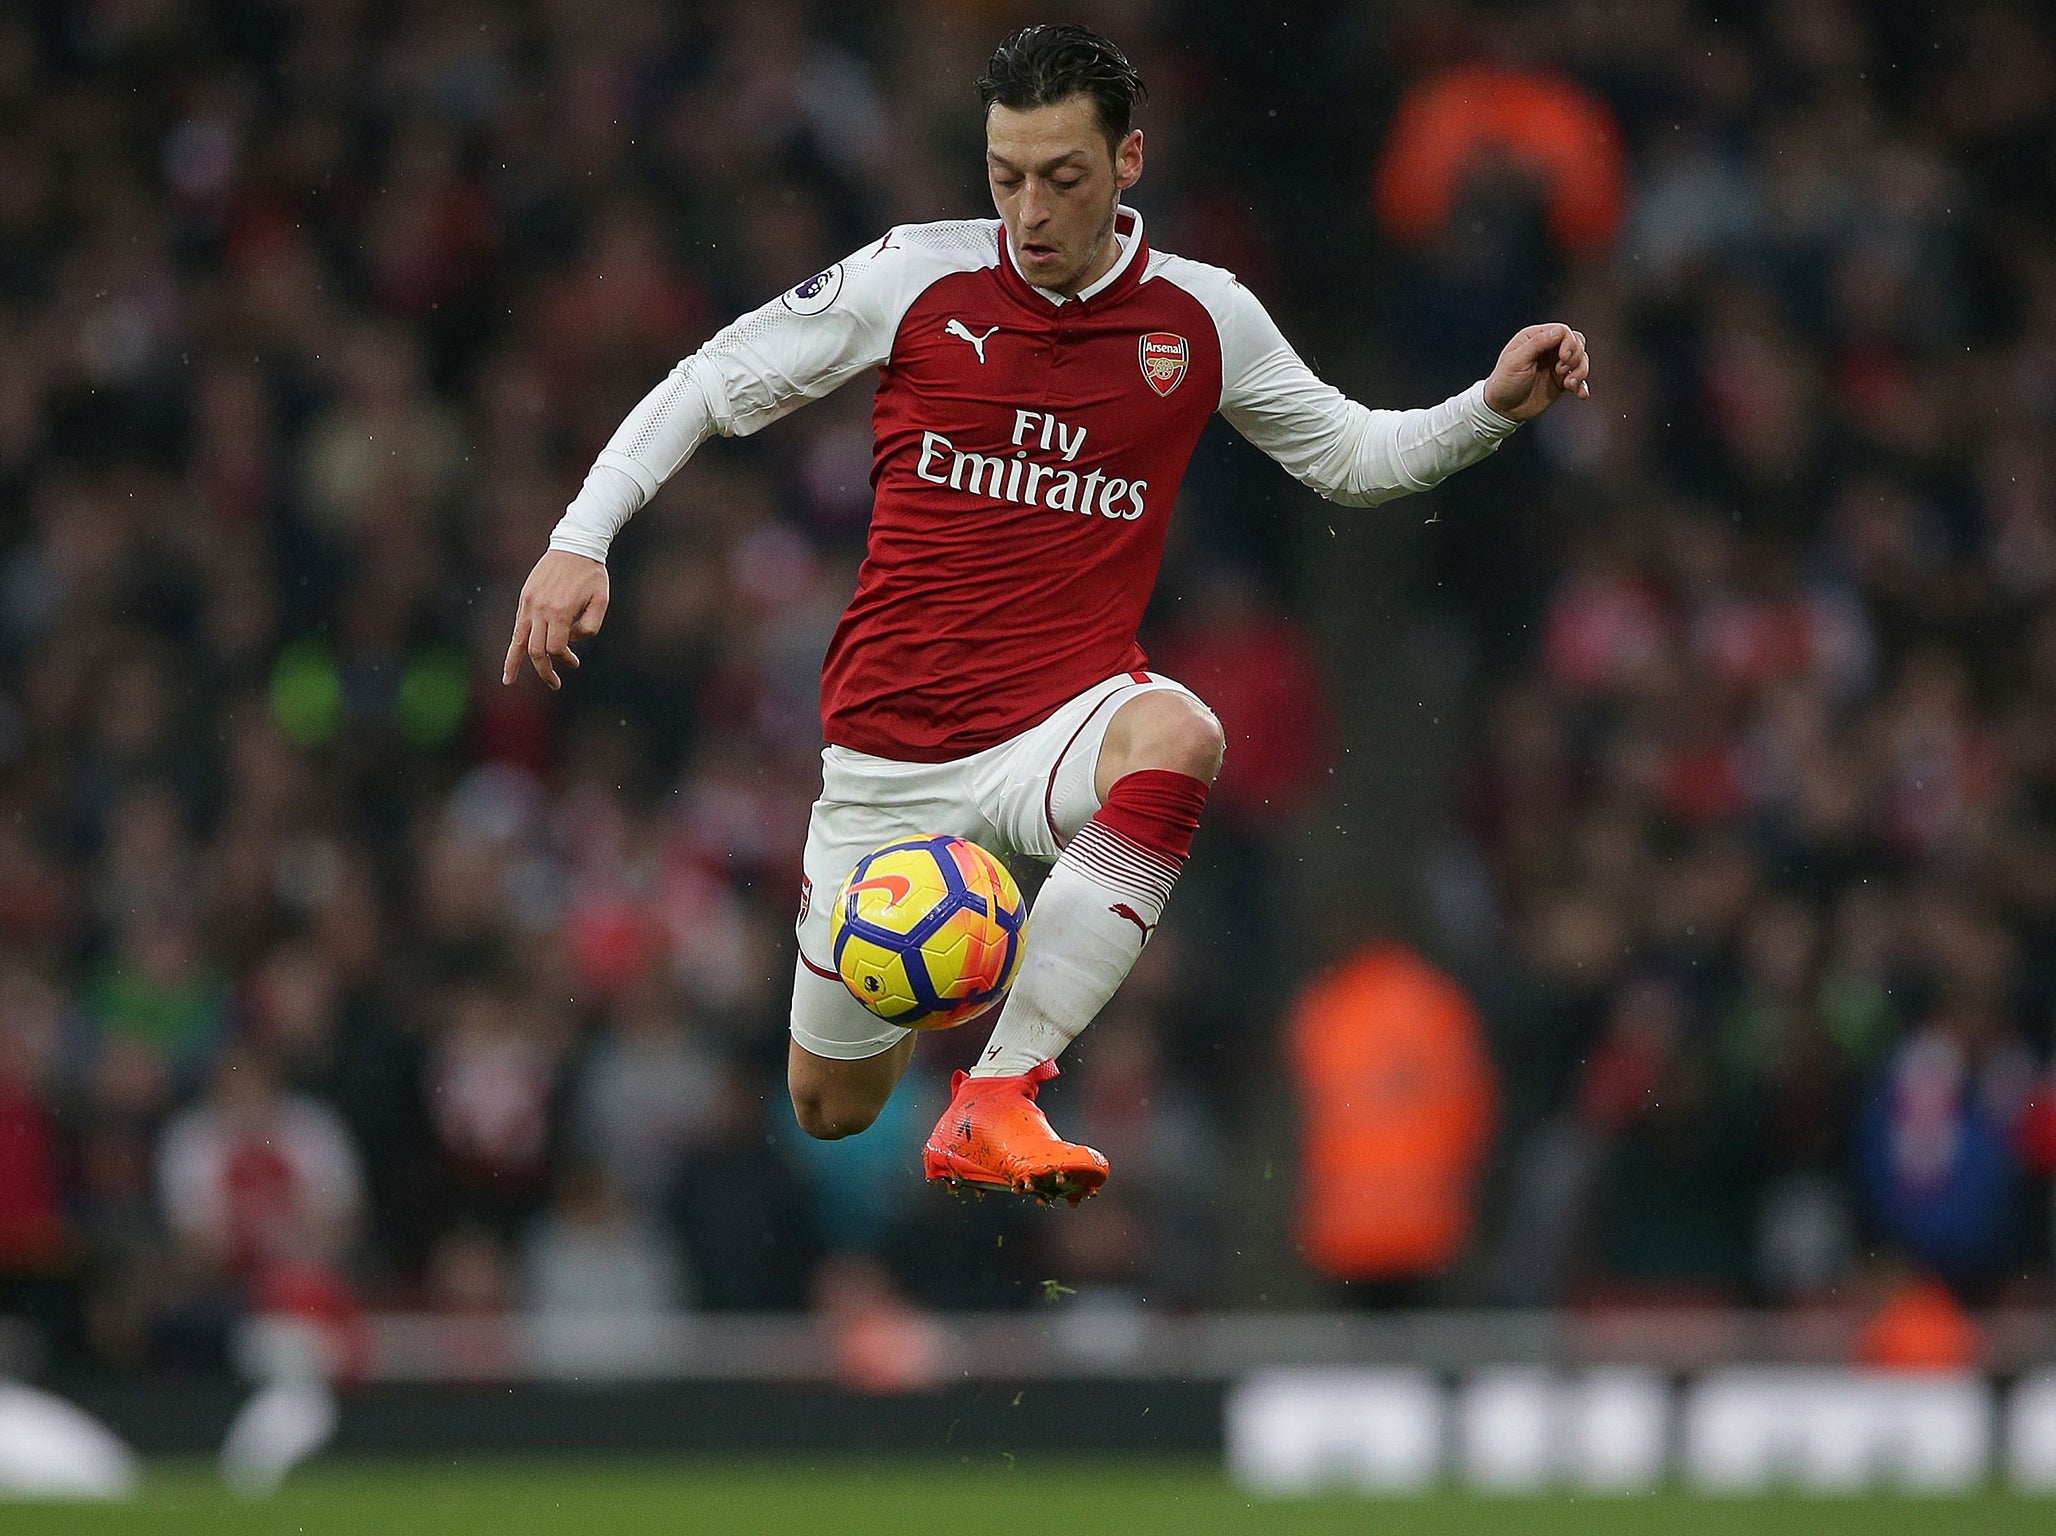 Ozil was brilliant as Arsenal beat Spurs